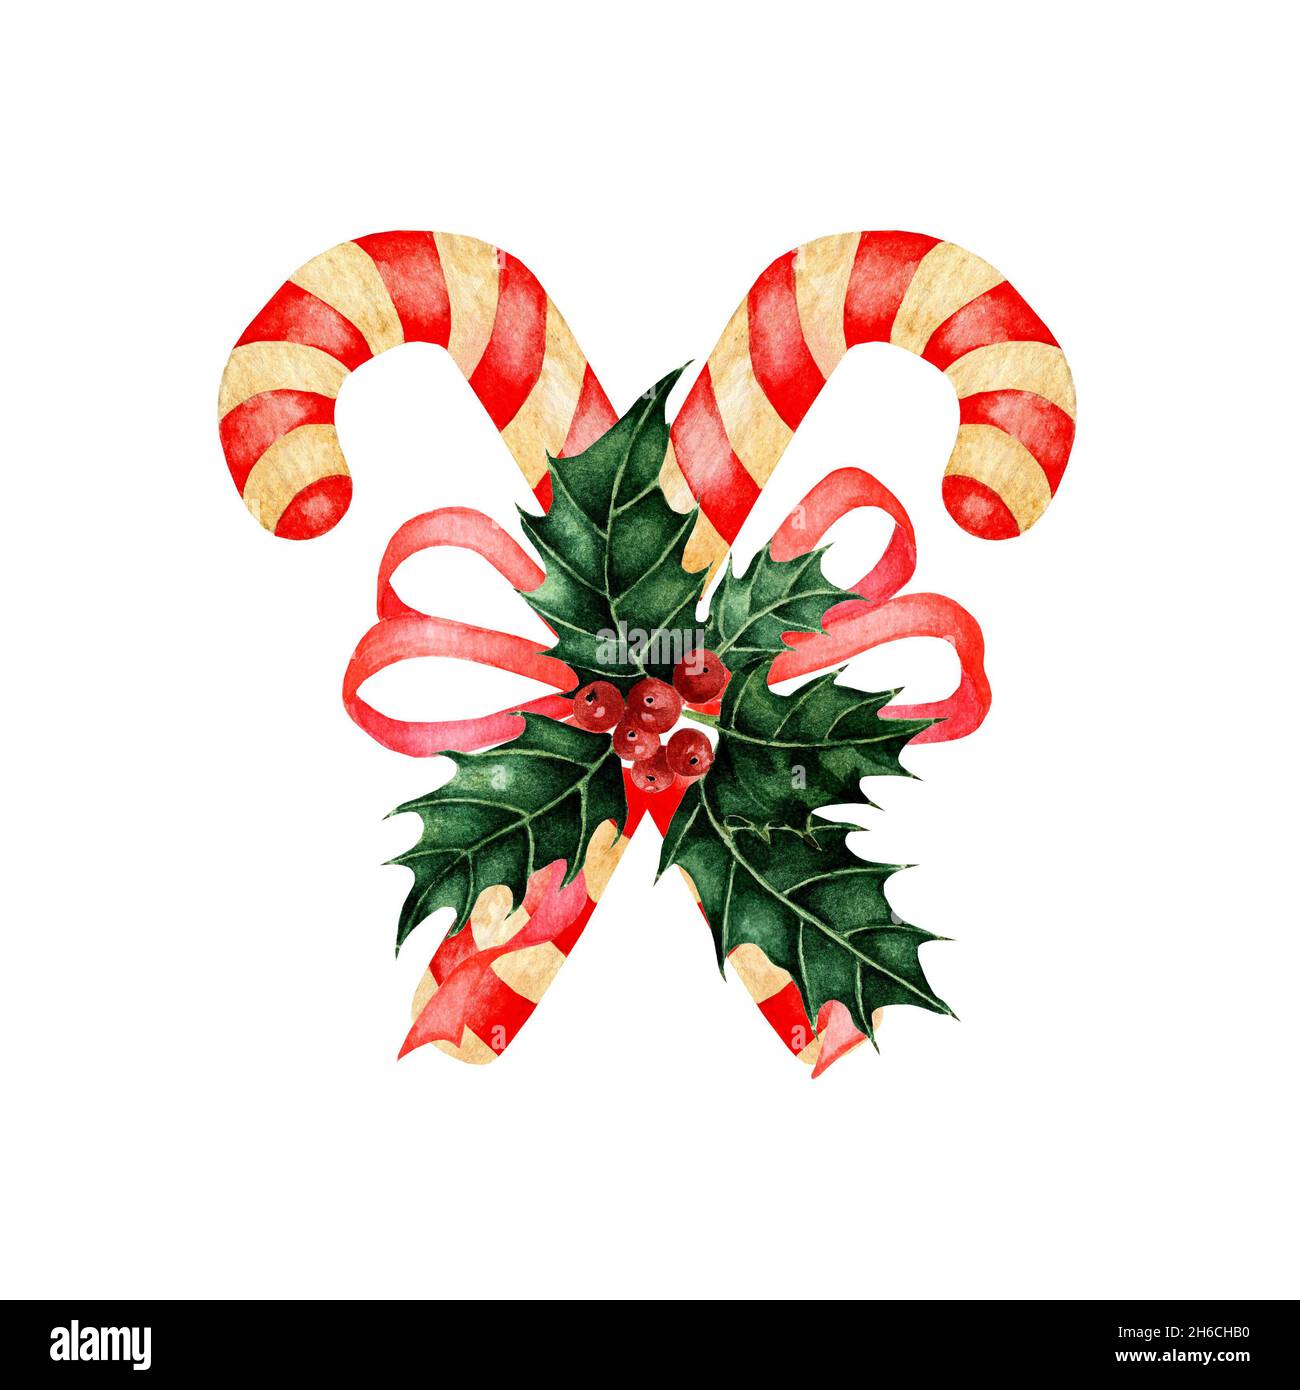 https://c8.alamy.com/comp/2H6CHB0/watercolor-christmas-lollipop-stick-with-red-bow-ribbon-holly-leaves-and-red-berries-sweets-for-the-winter-holiday-christmas-new-year-card-isolate-2H6CHB0.jpg